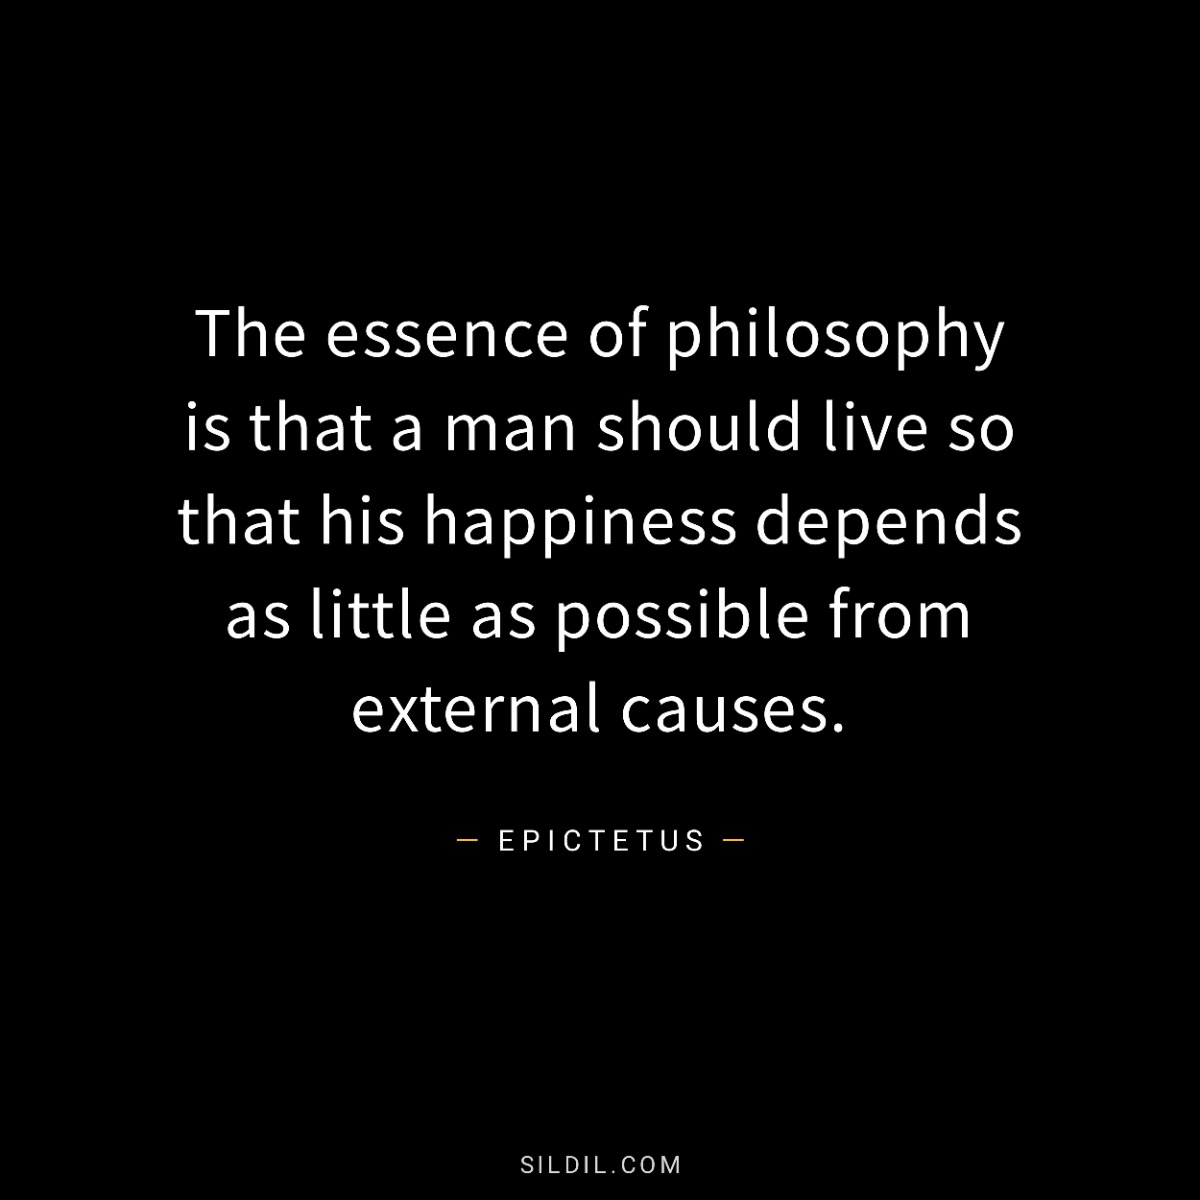 The essence of philosophy is that a man should live so that his happiness depends as little as possible from external causes.